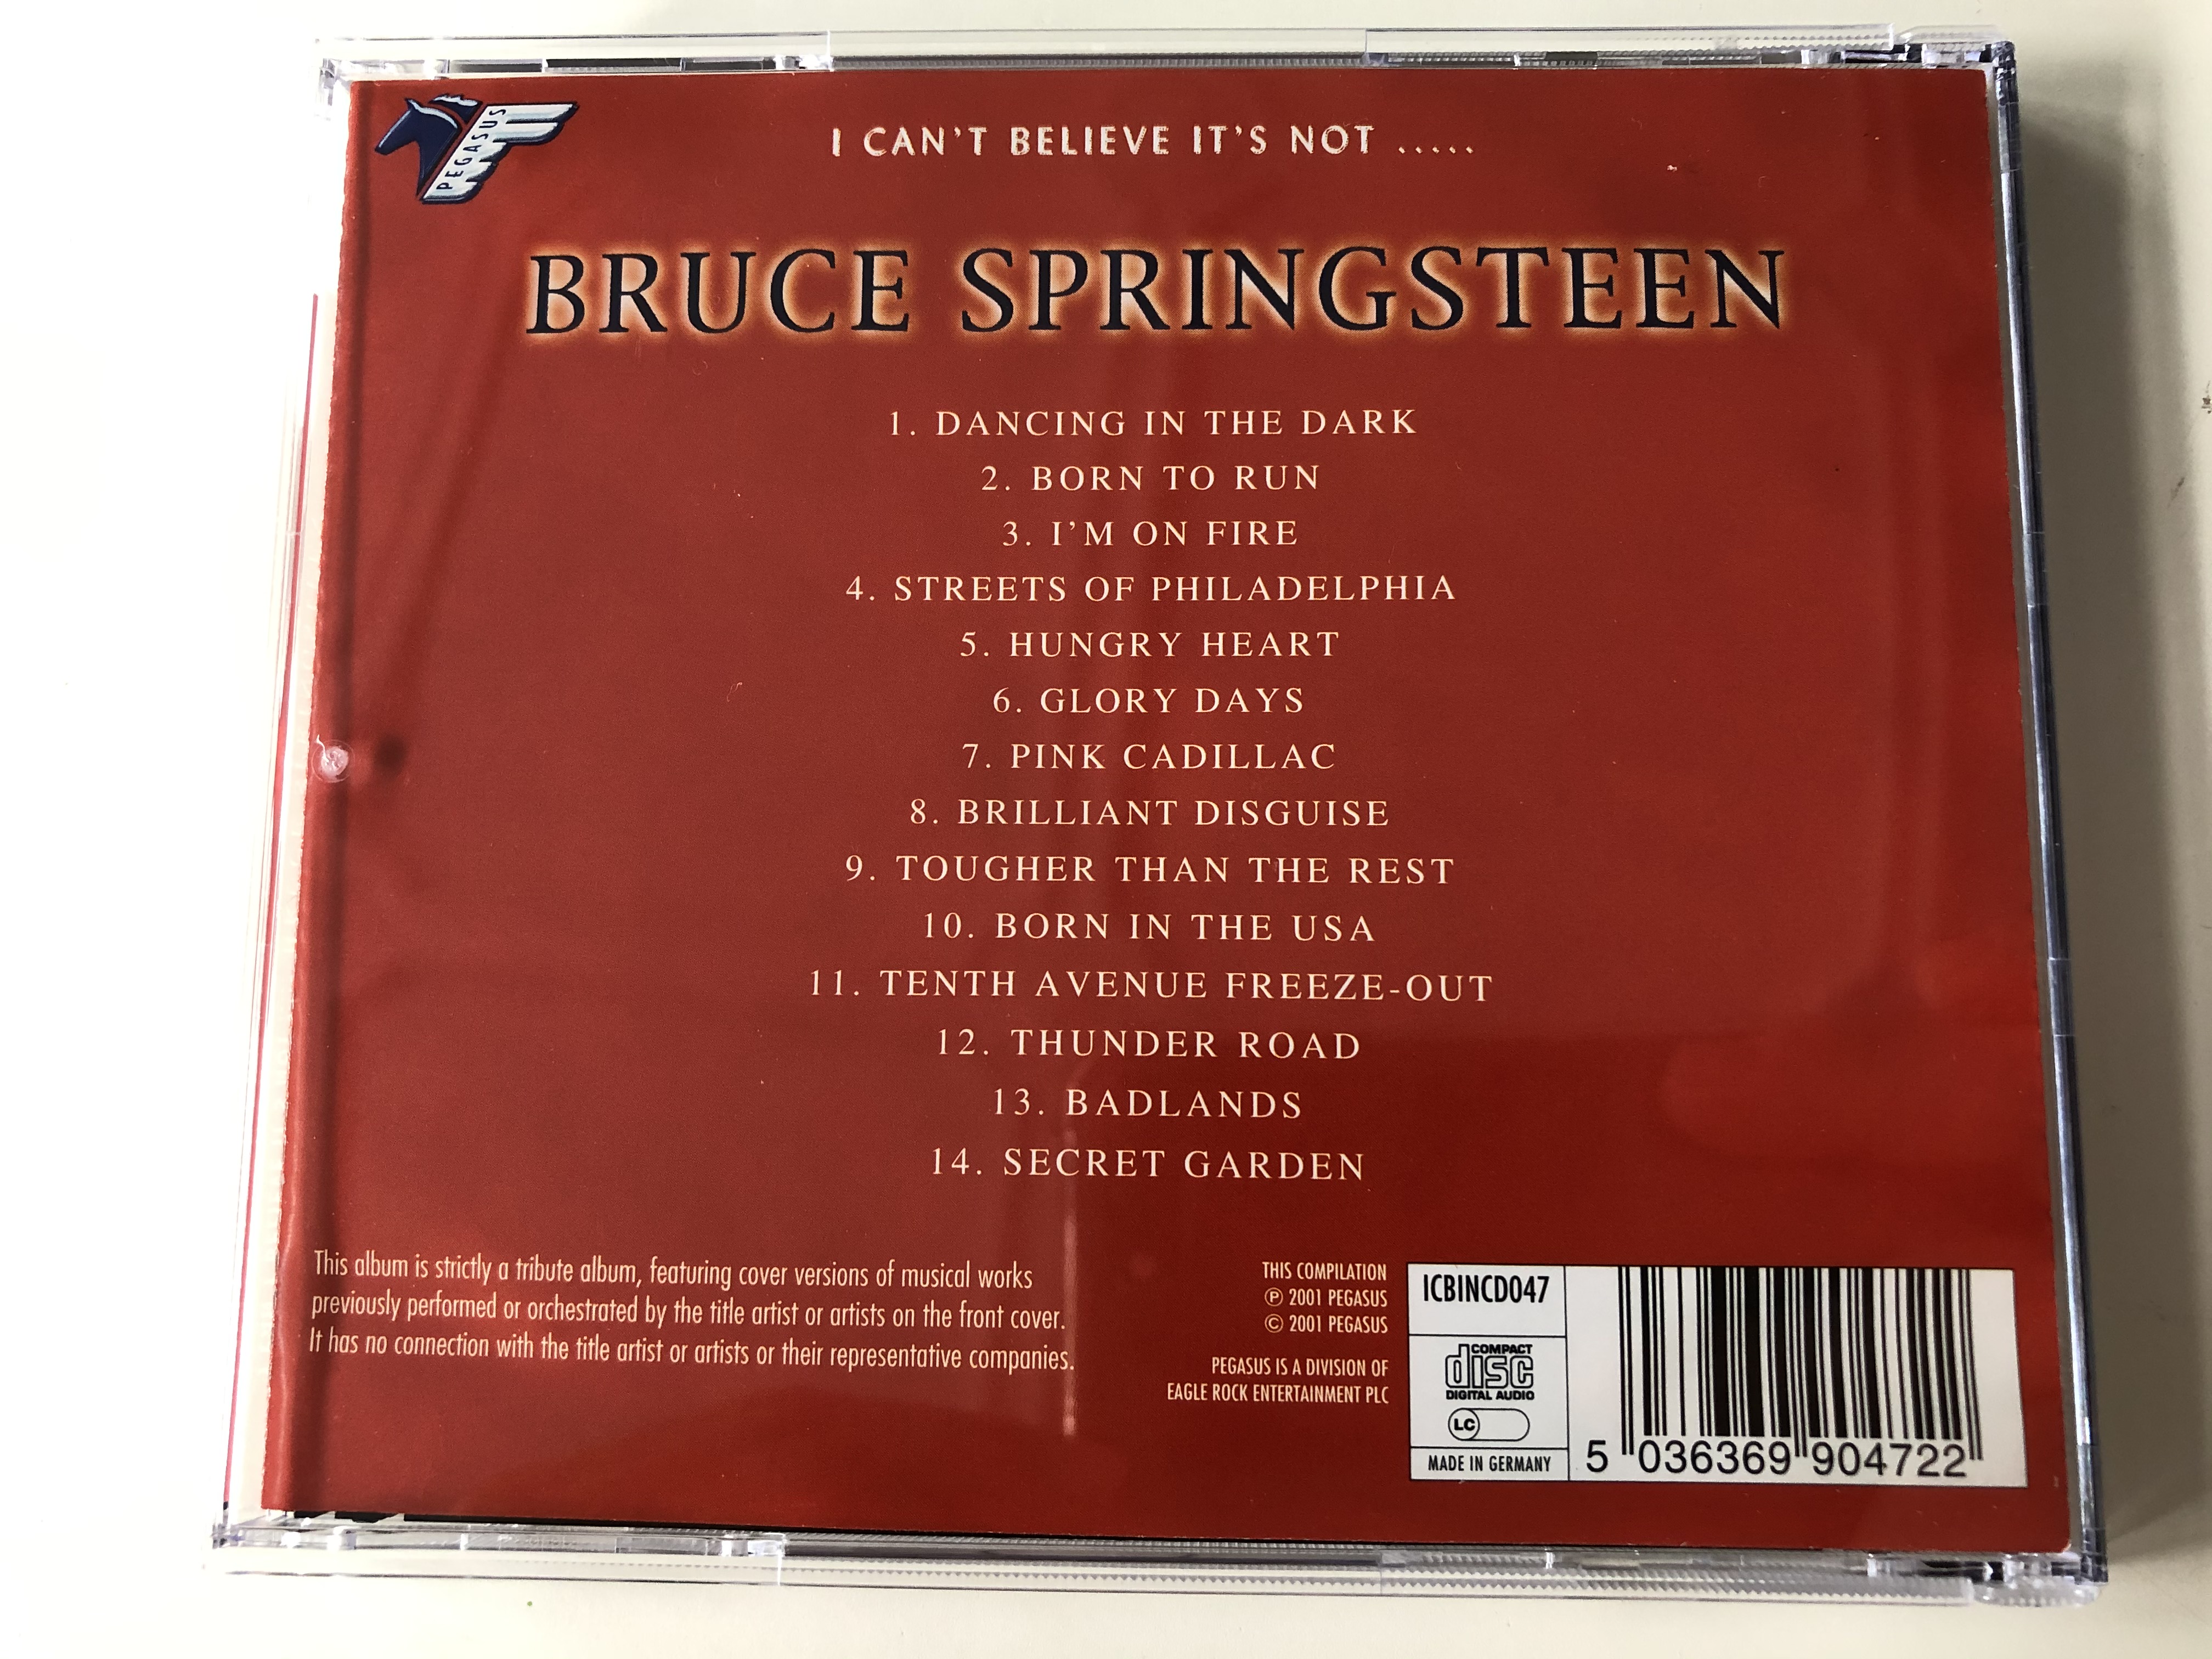 bruce-springsteen-i-can-t-believe-it-s-not...-born-in-the-usa-tracks-performed-by-richard-coleman-include-born-in-the-usa-glory-days-streets-of-philadelphia-pegasus-audio-cd-2001-icbi-6-.jpg